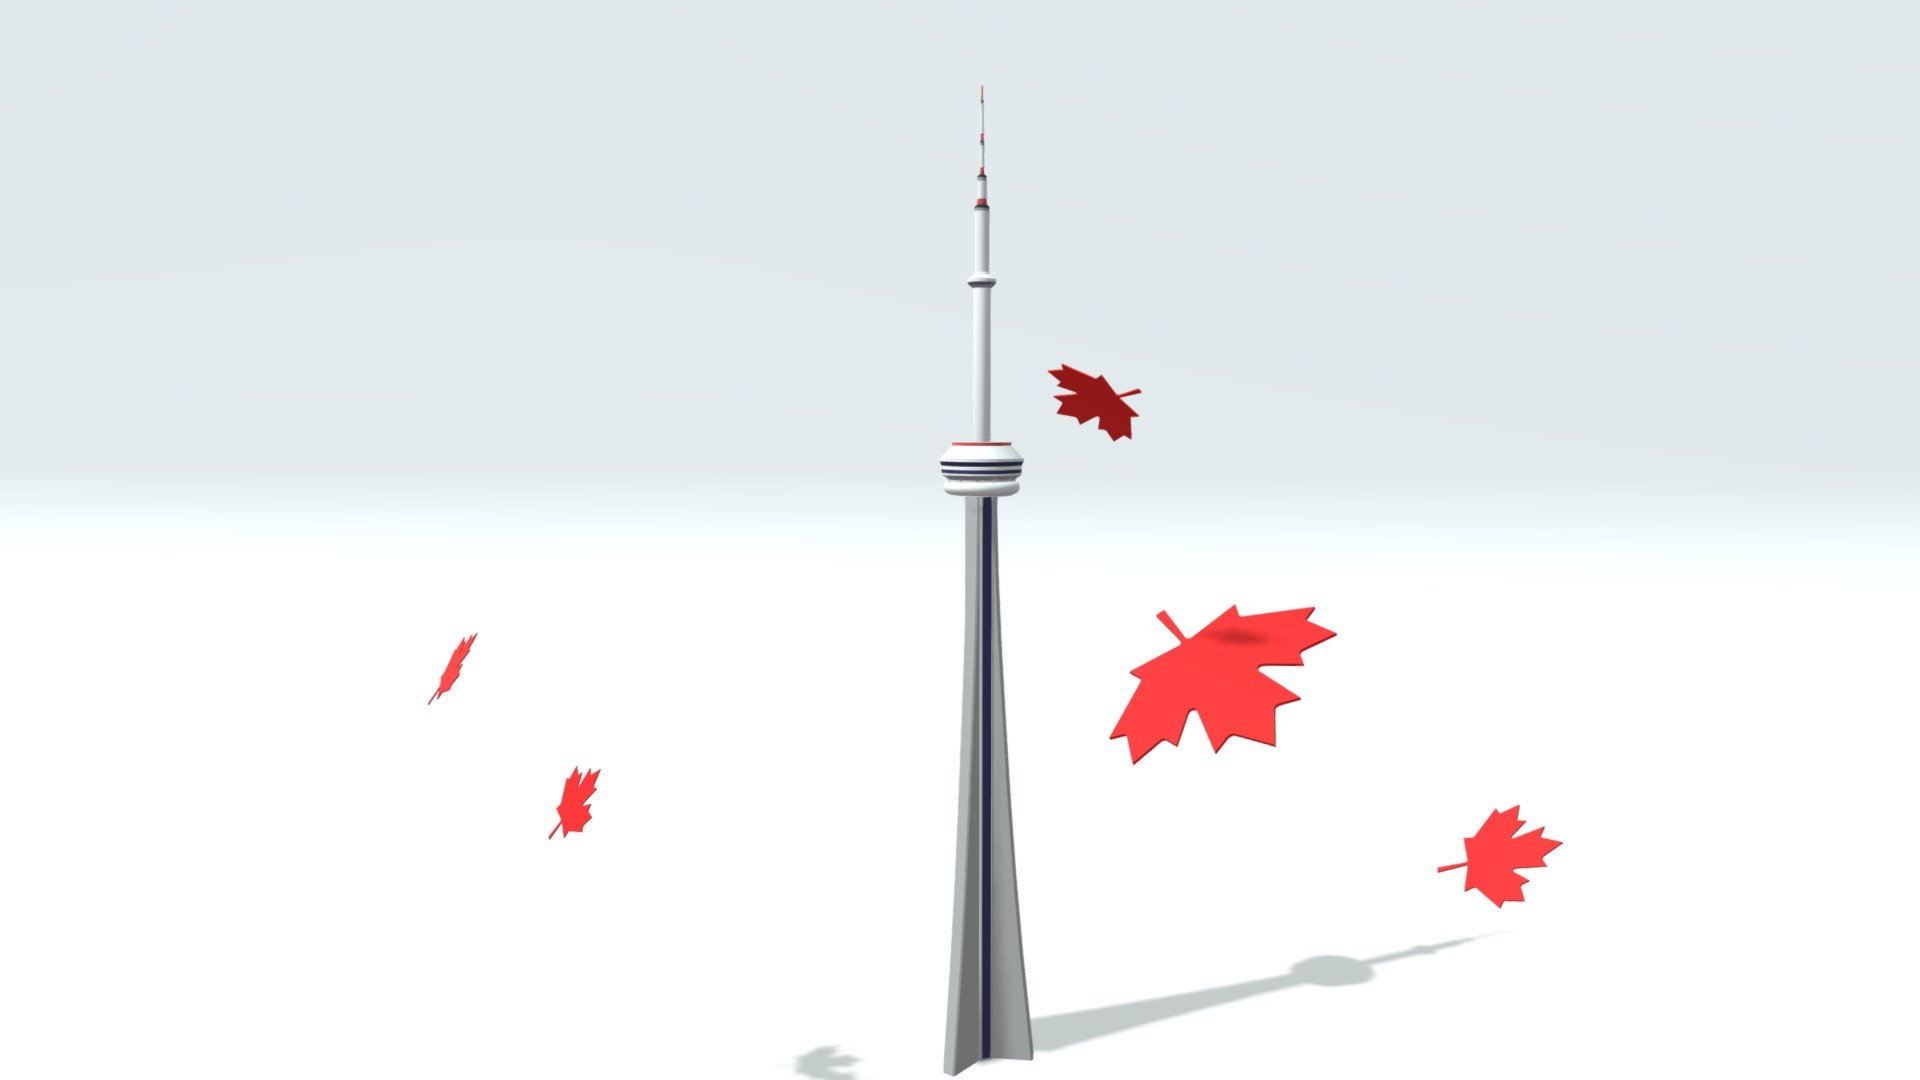 -Lovely CN Tower Toronto.

-This product contains 30 models.

-This product was created in Blender 2.8.

-Total vertices: 24,218 Total polygons: 24,661.

-Formats: . blend . fbx . obj, c4d, dae, fbx, unity.

-We hope you enjoy this model.

-Thank you 3d model